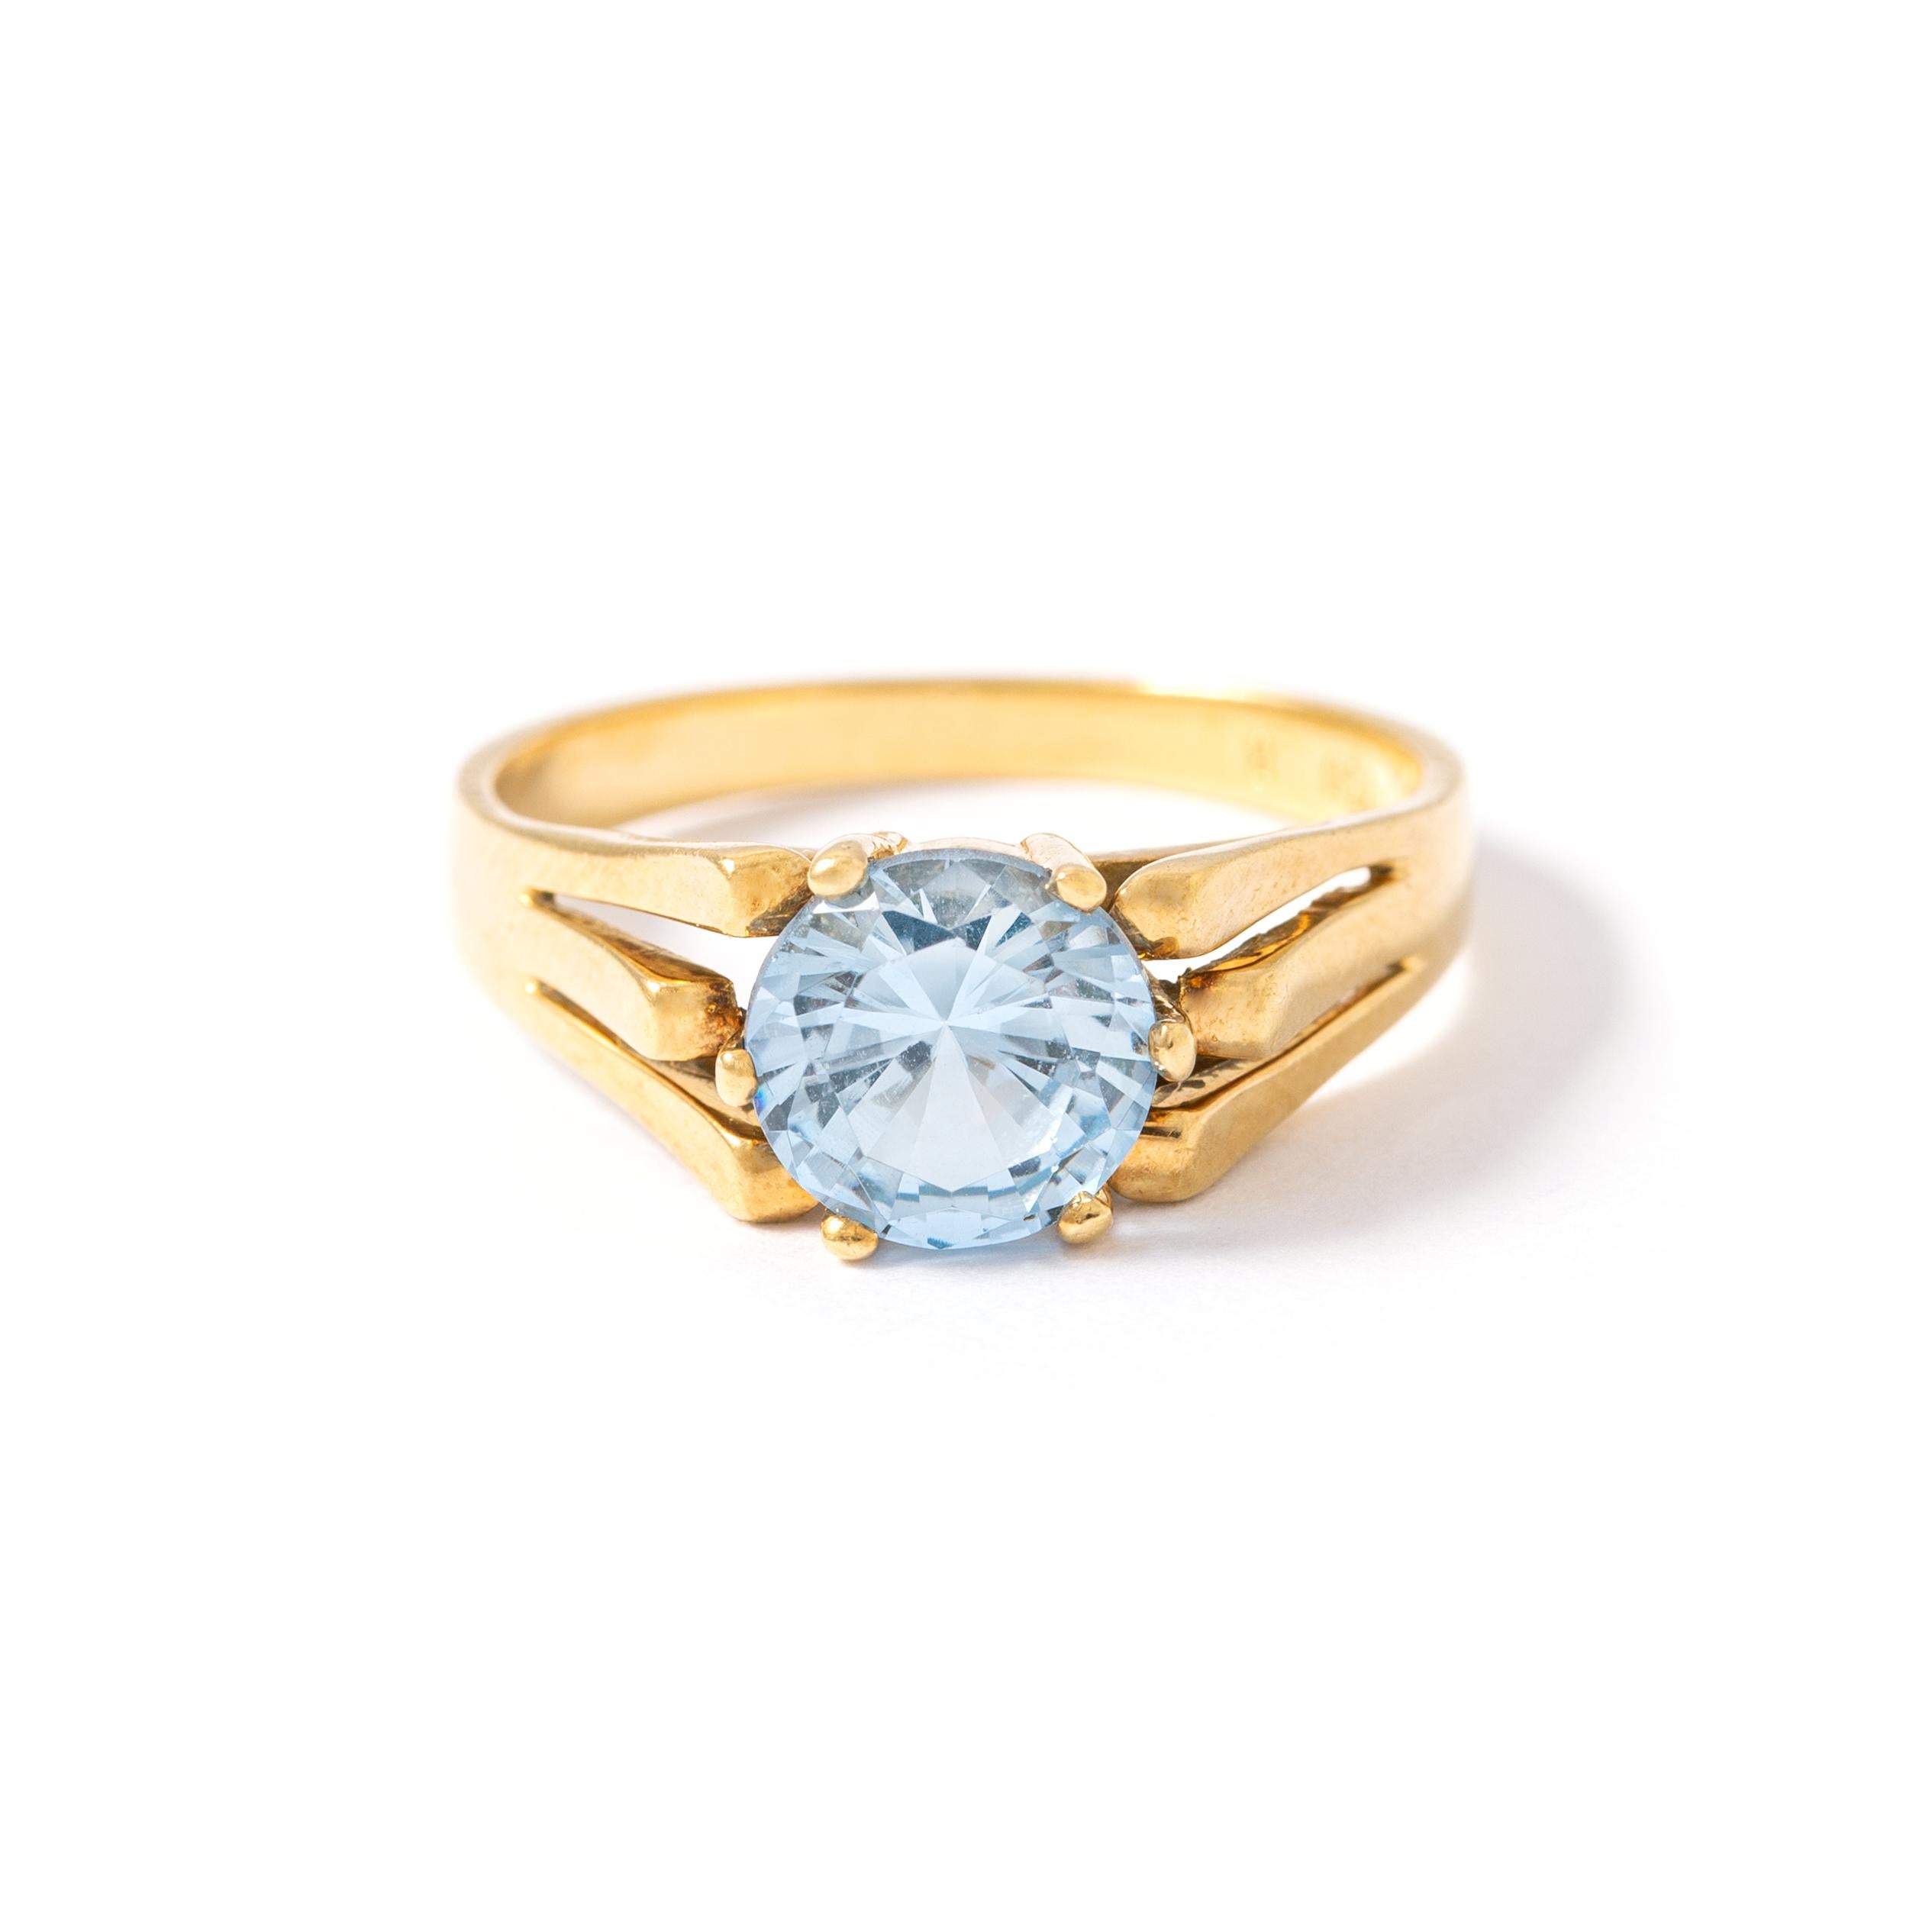 18K yellow gold ring centered by a round aquamarine.
Finger size: 53.
Gross weight: 3.93g.